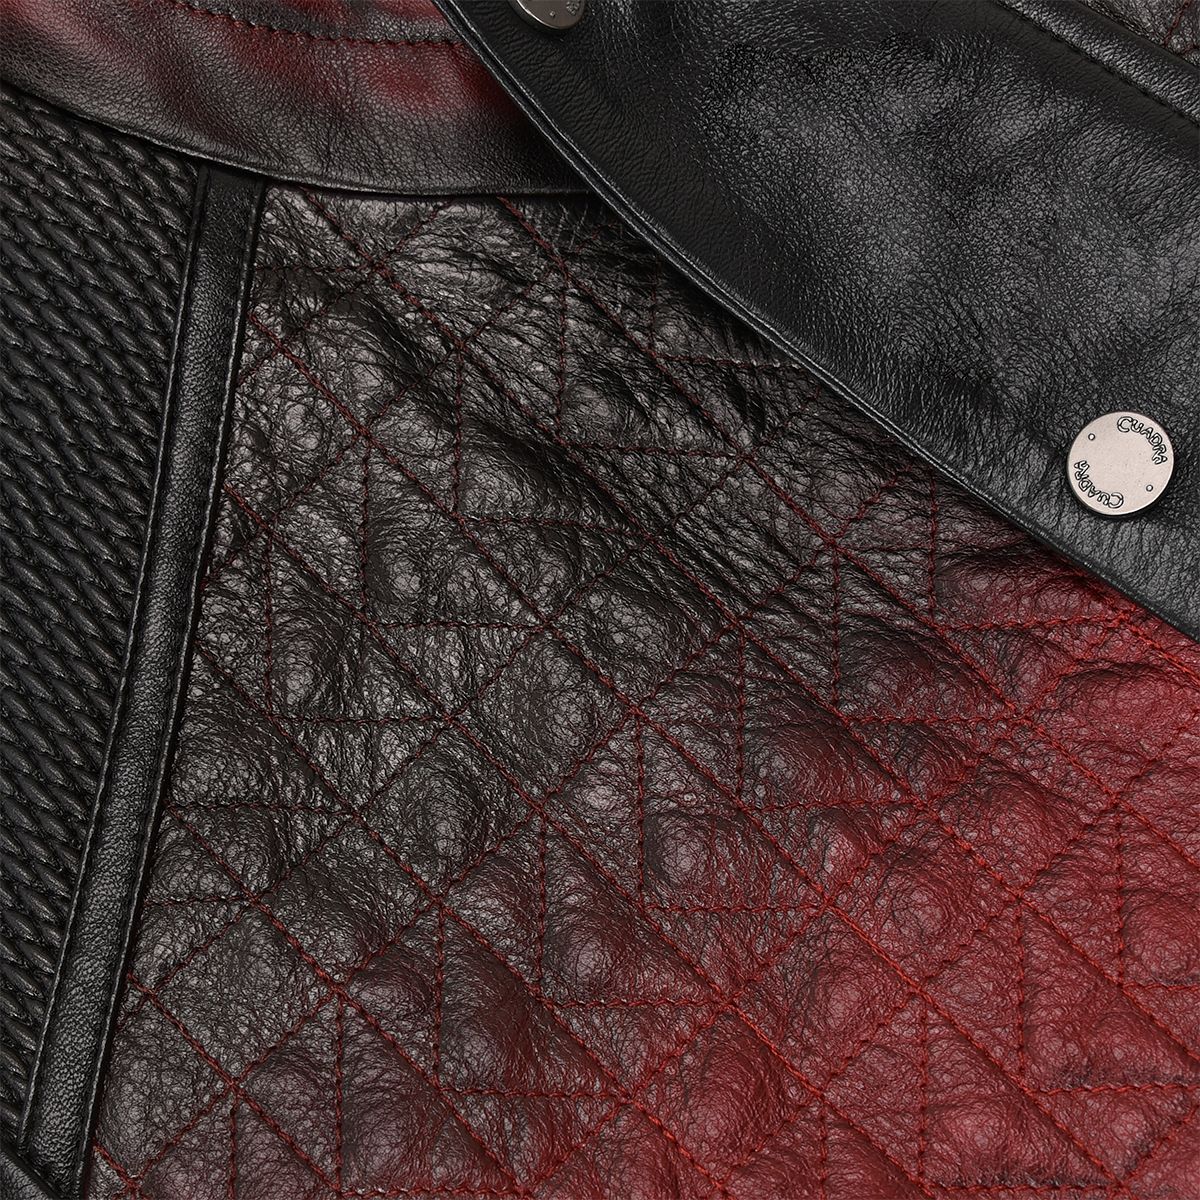 H295COB- Cuadra red casual fashion quilted goat leather racer vest for men-CUADRA-Kuet-Cuadra-Boots